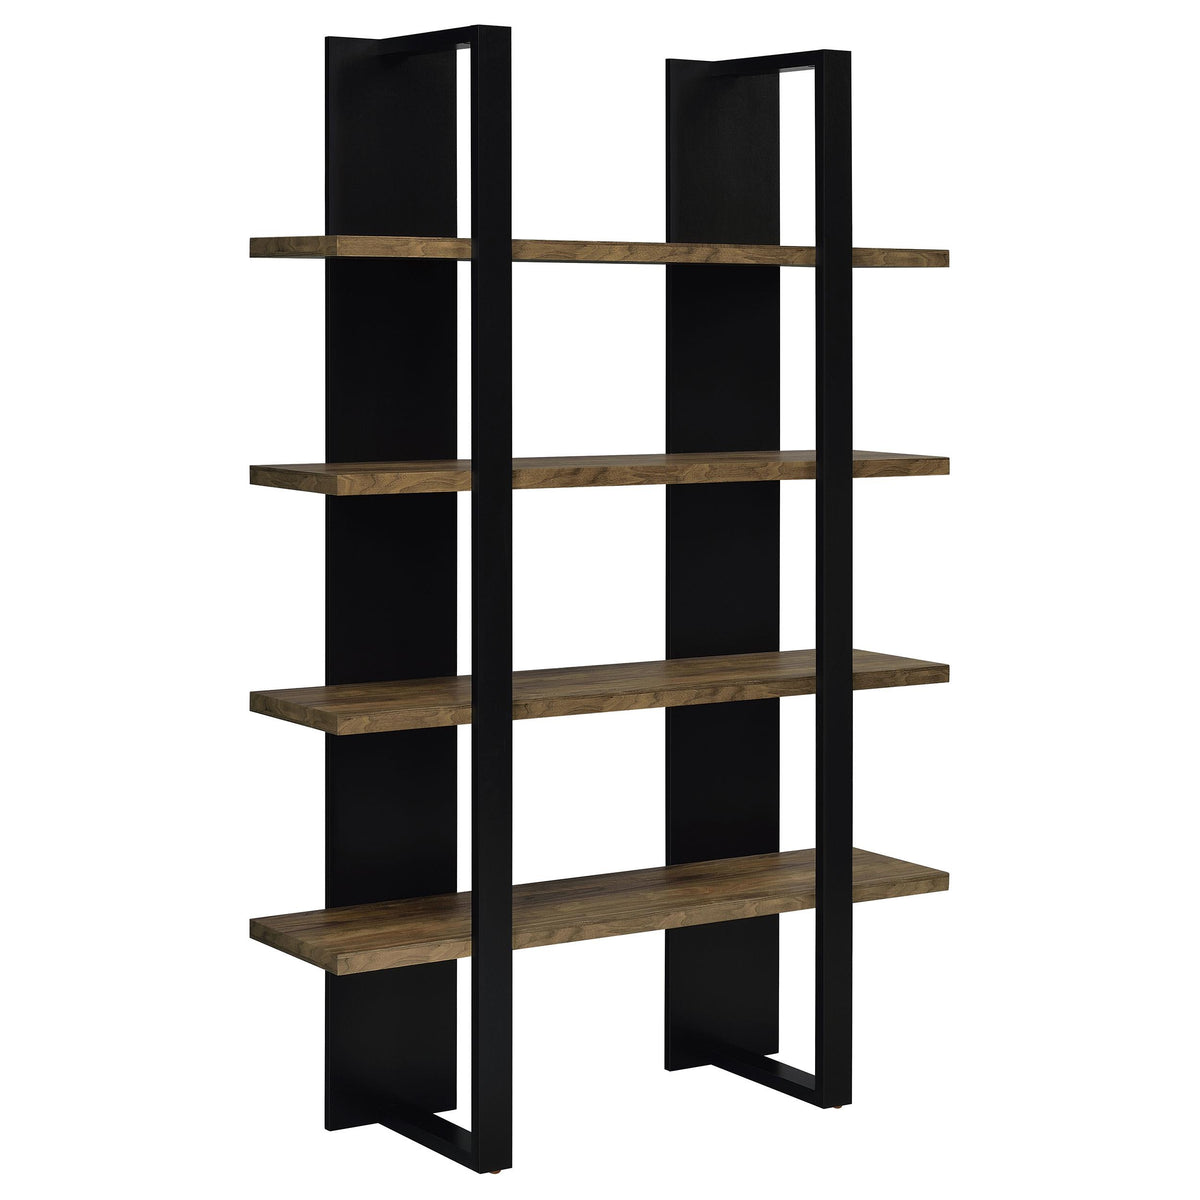 Danbrook Bookcase with 4 Full-length Shelves  Half Price Furniture